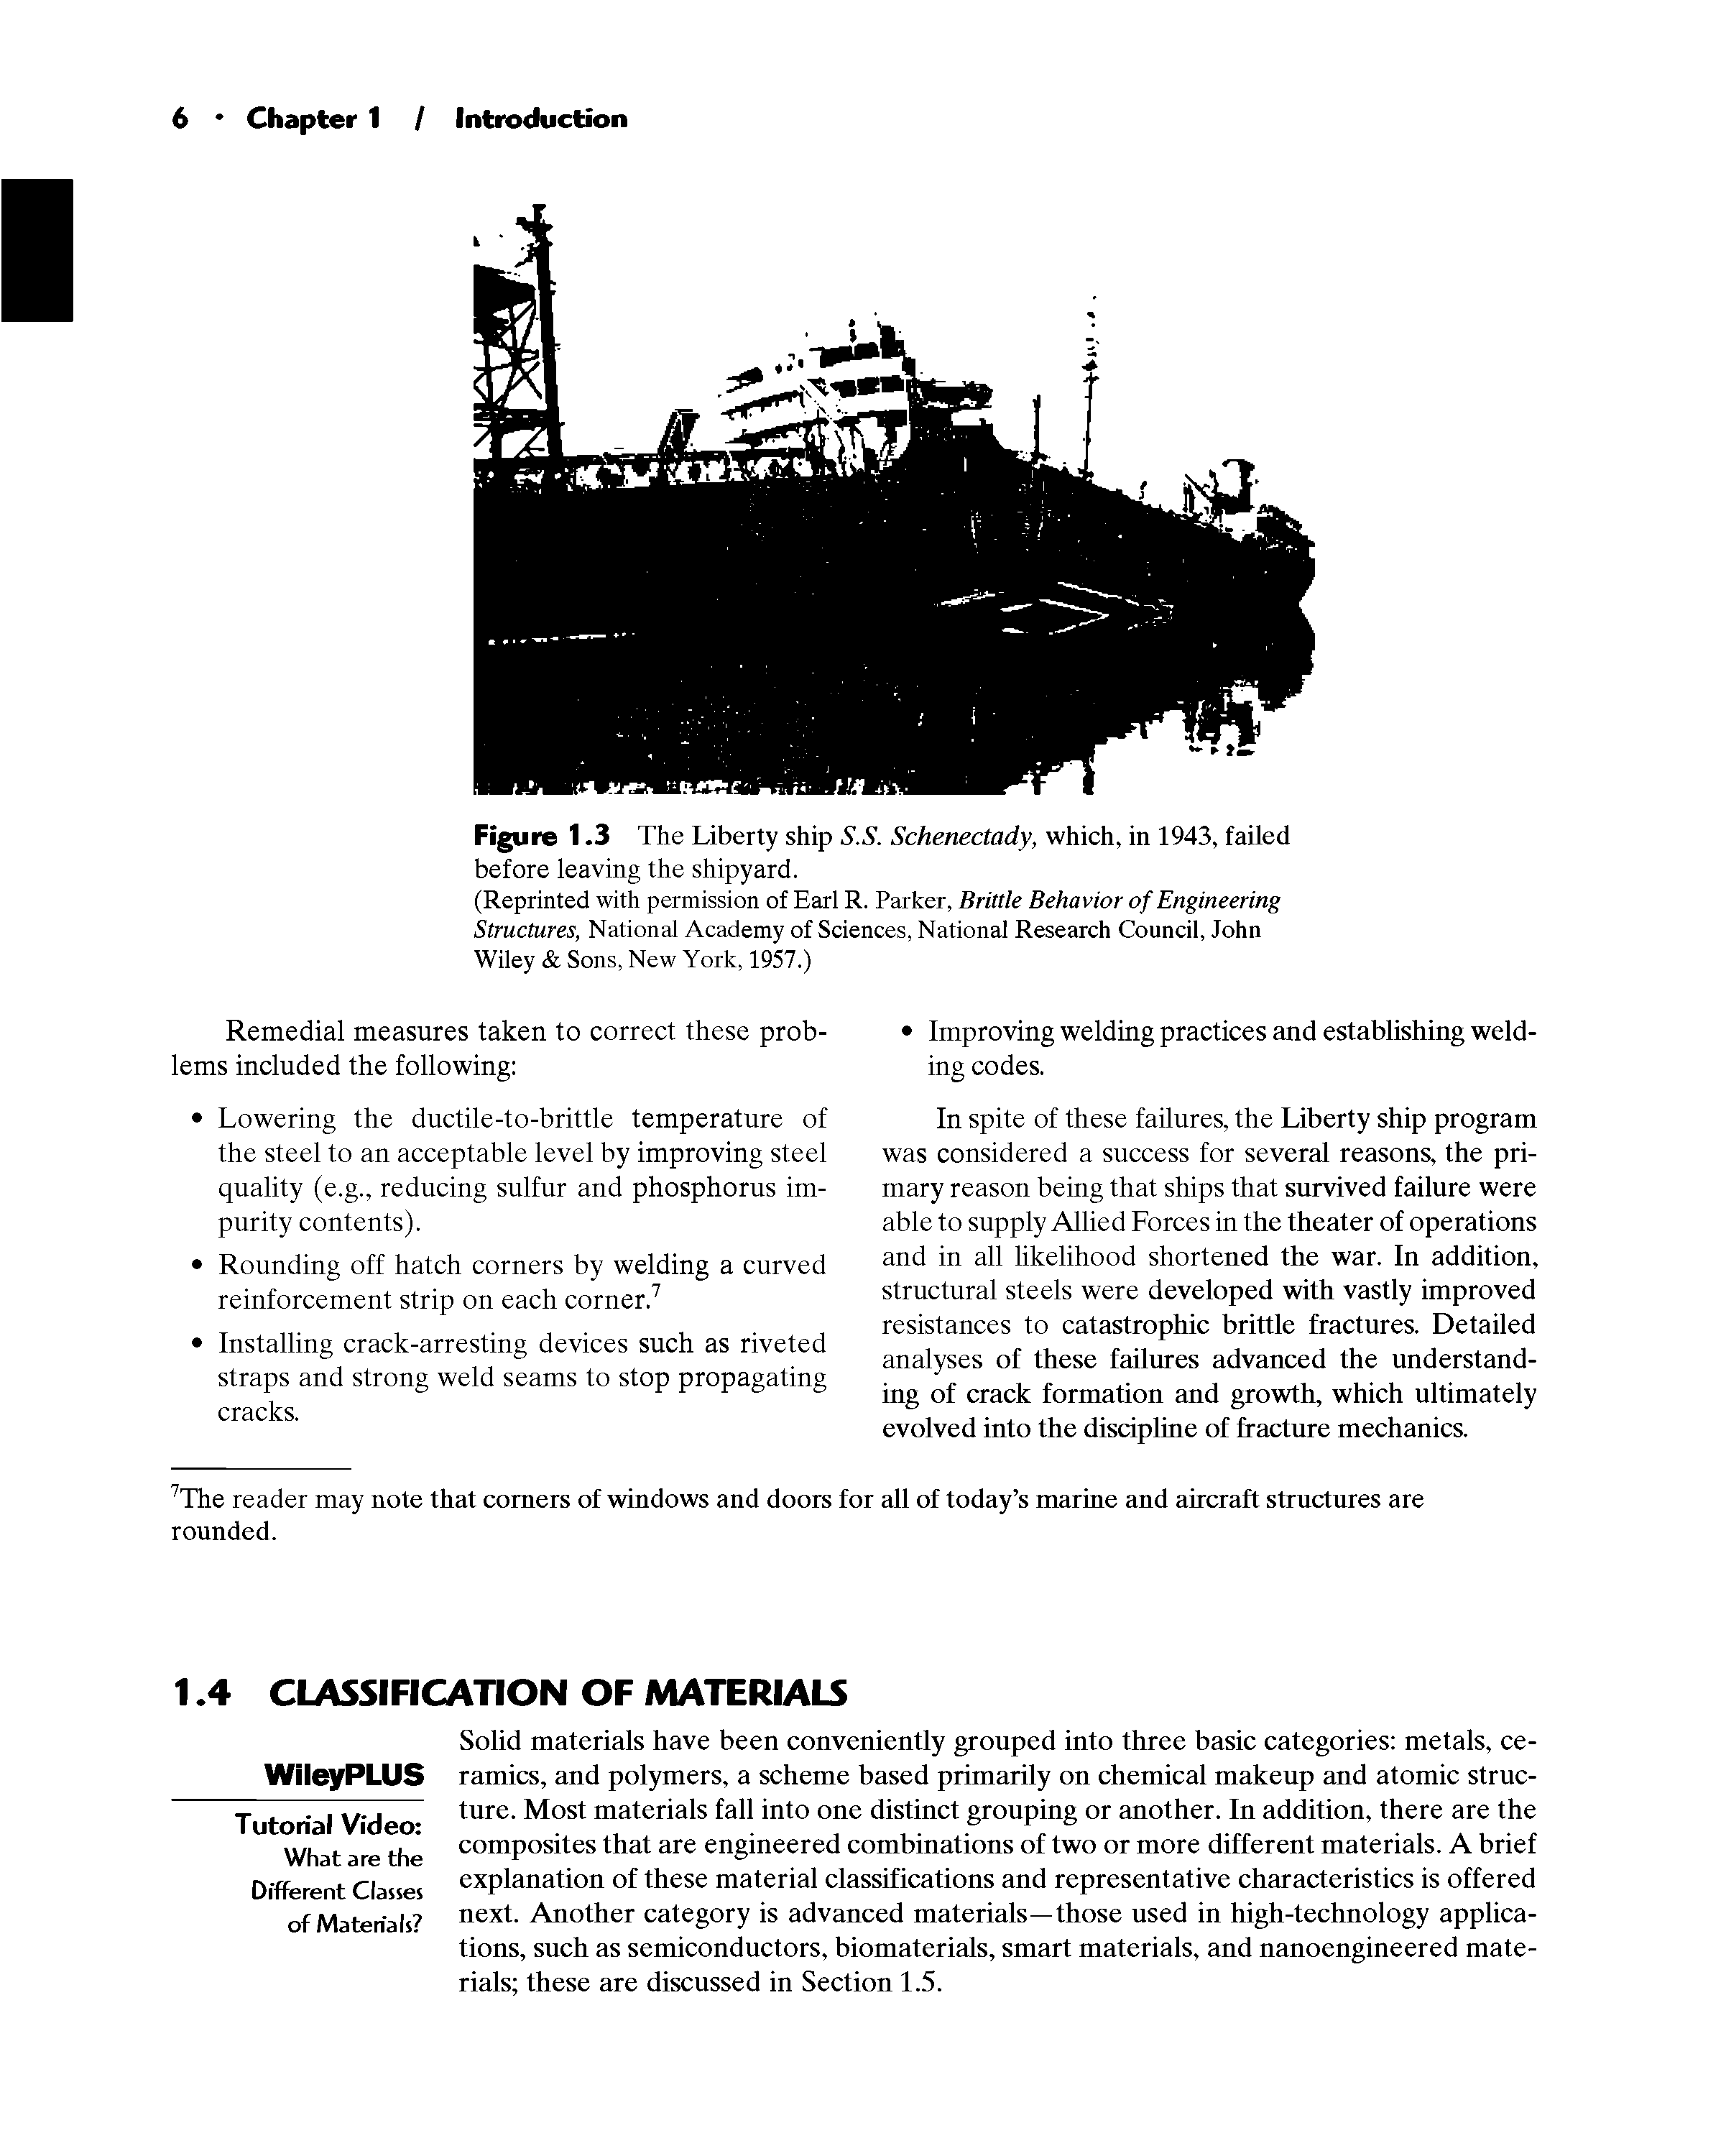 Figure 1.3 The Liberty ship S.S. Schenectady, which, in 1943, failed before leaving the shipyard.